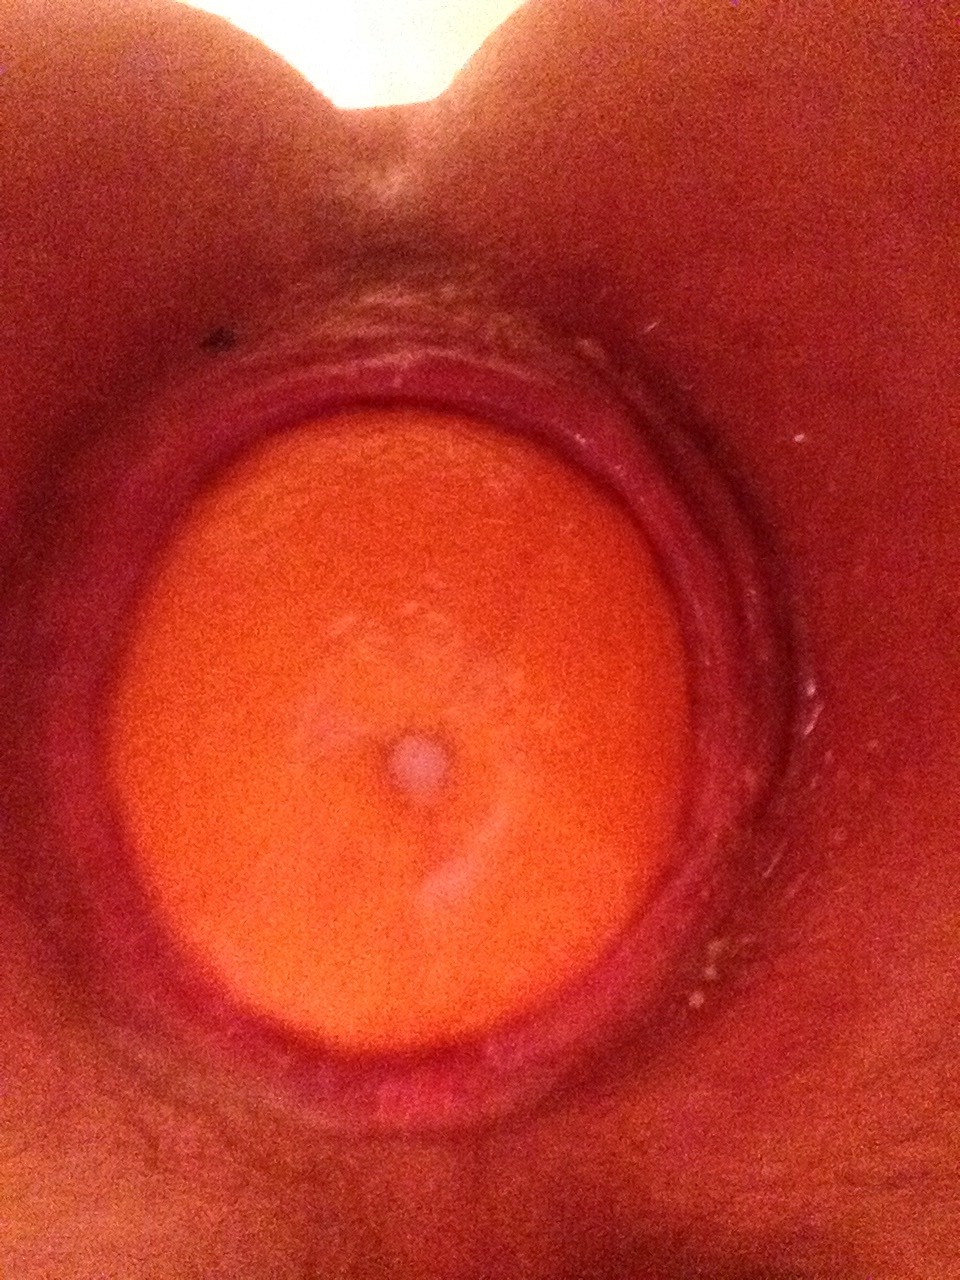 machineanddildofucked:  My ass swallowed an orange  a very good cunt stretchingFollow